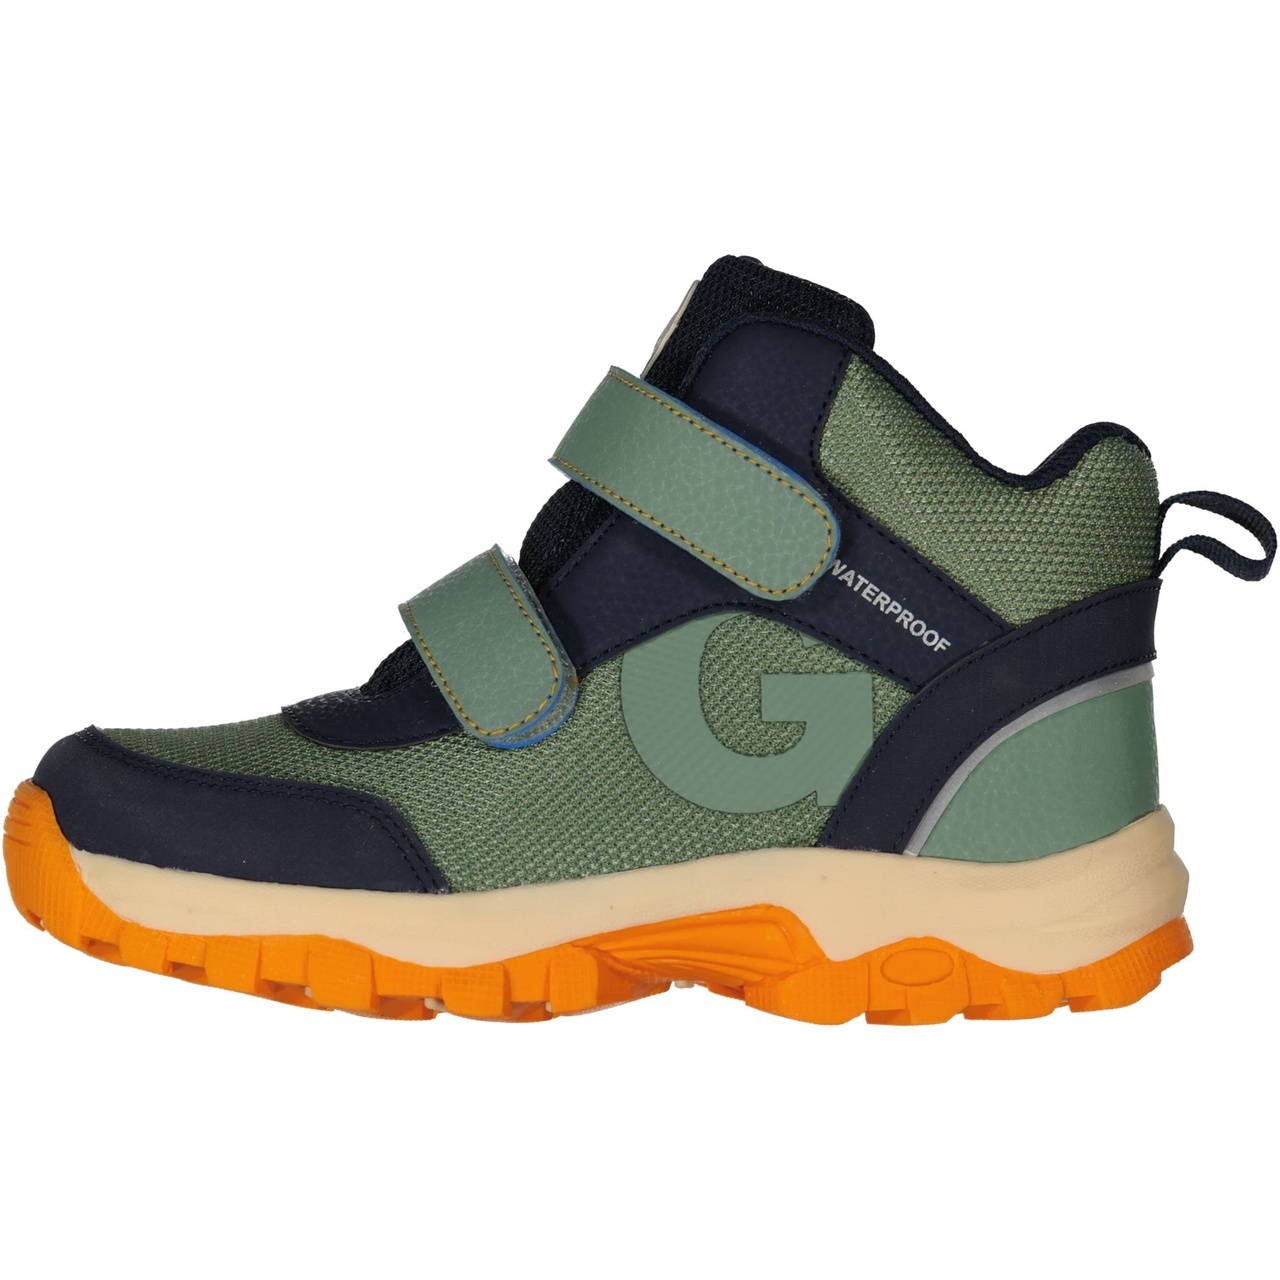 All weather shoes Moss green  31 (20,4 cm)